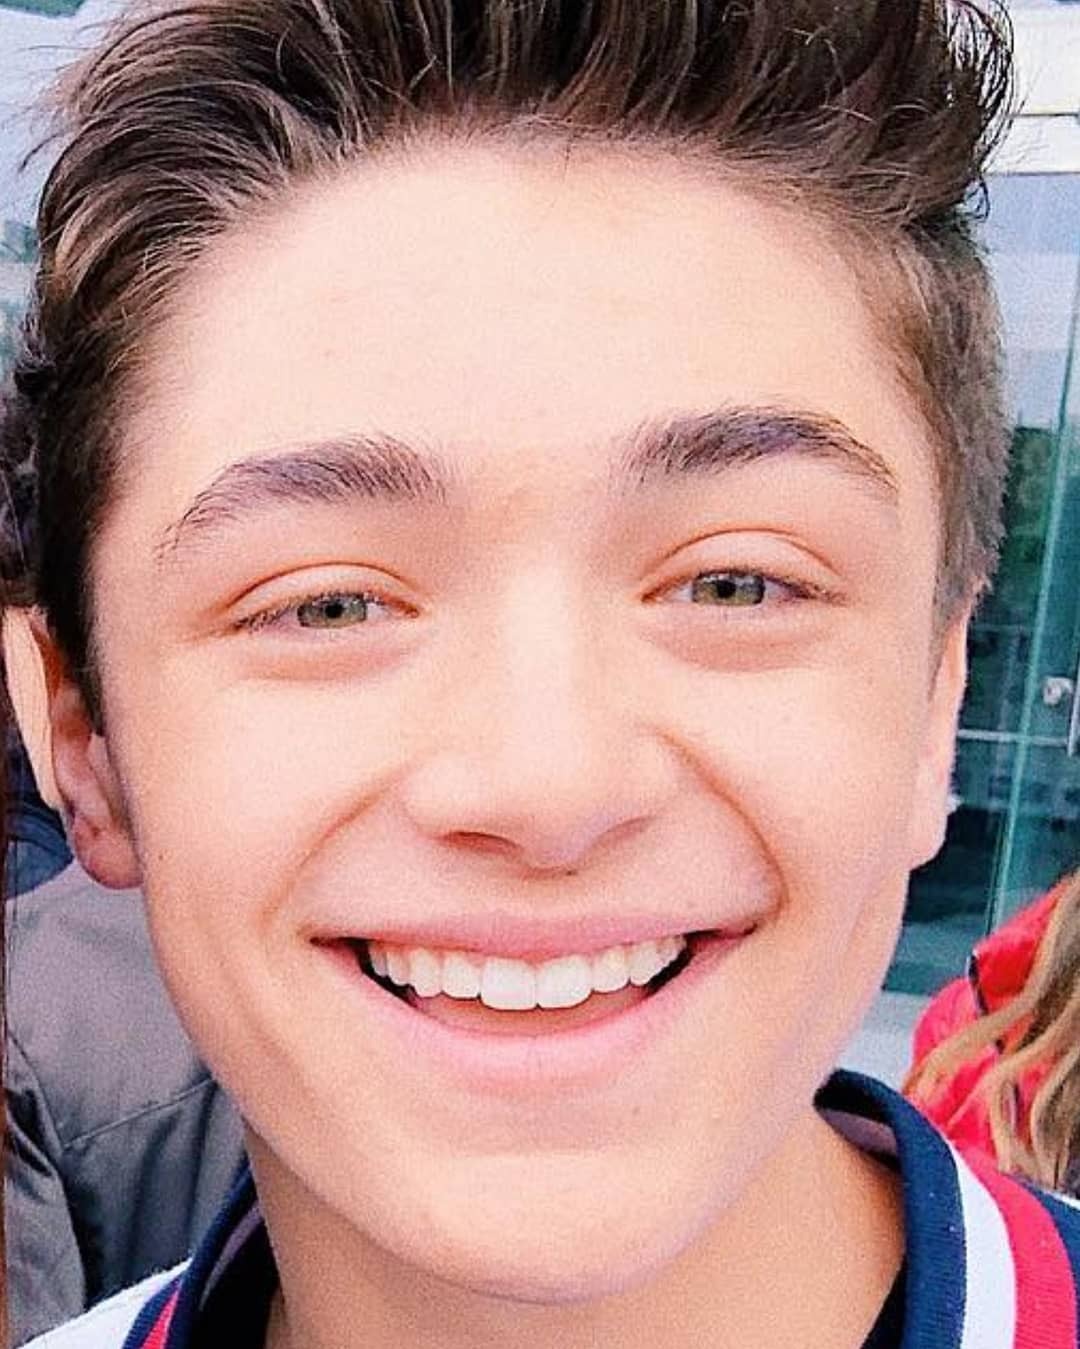 Picture Of Asher Angel In General Pictures Asher Angel 1553094926 Teen Idols 4 You 